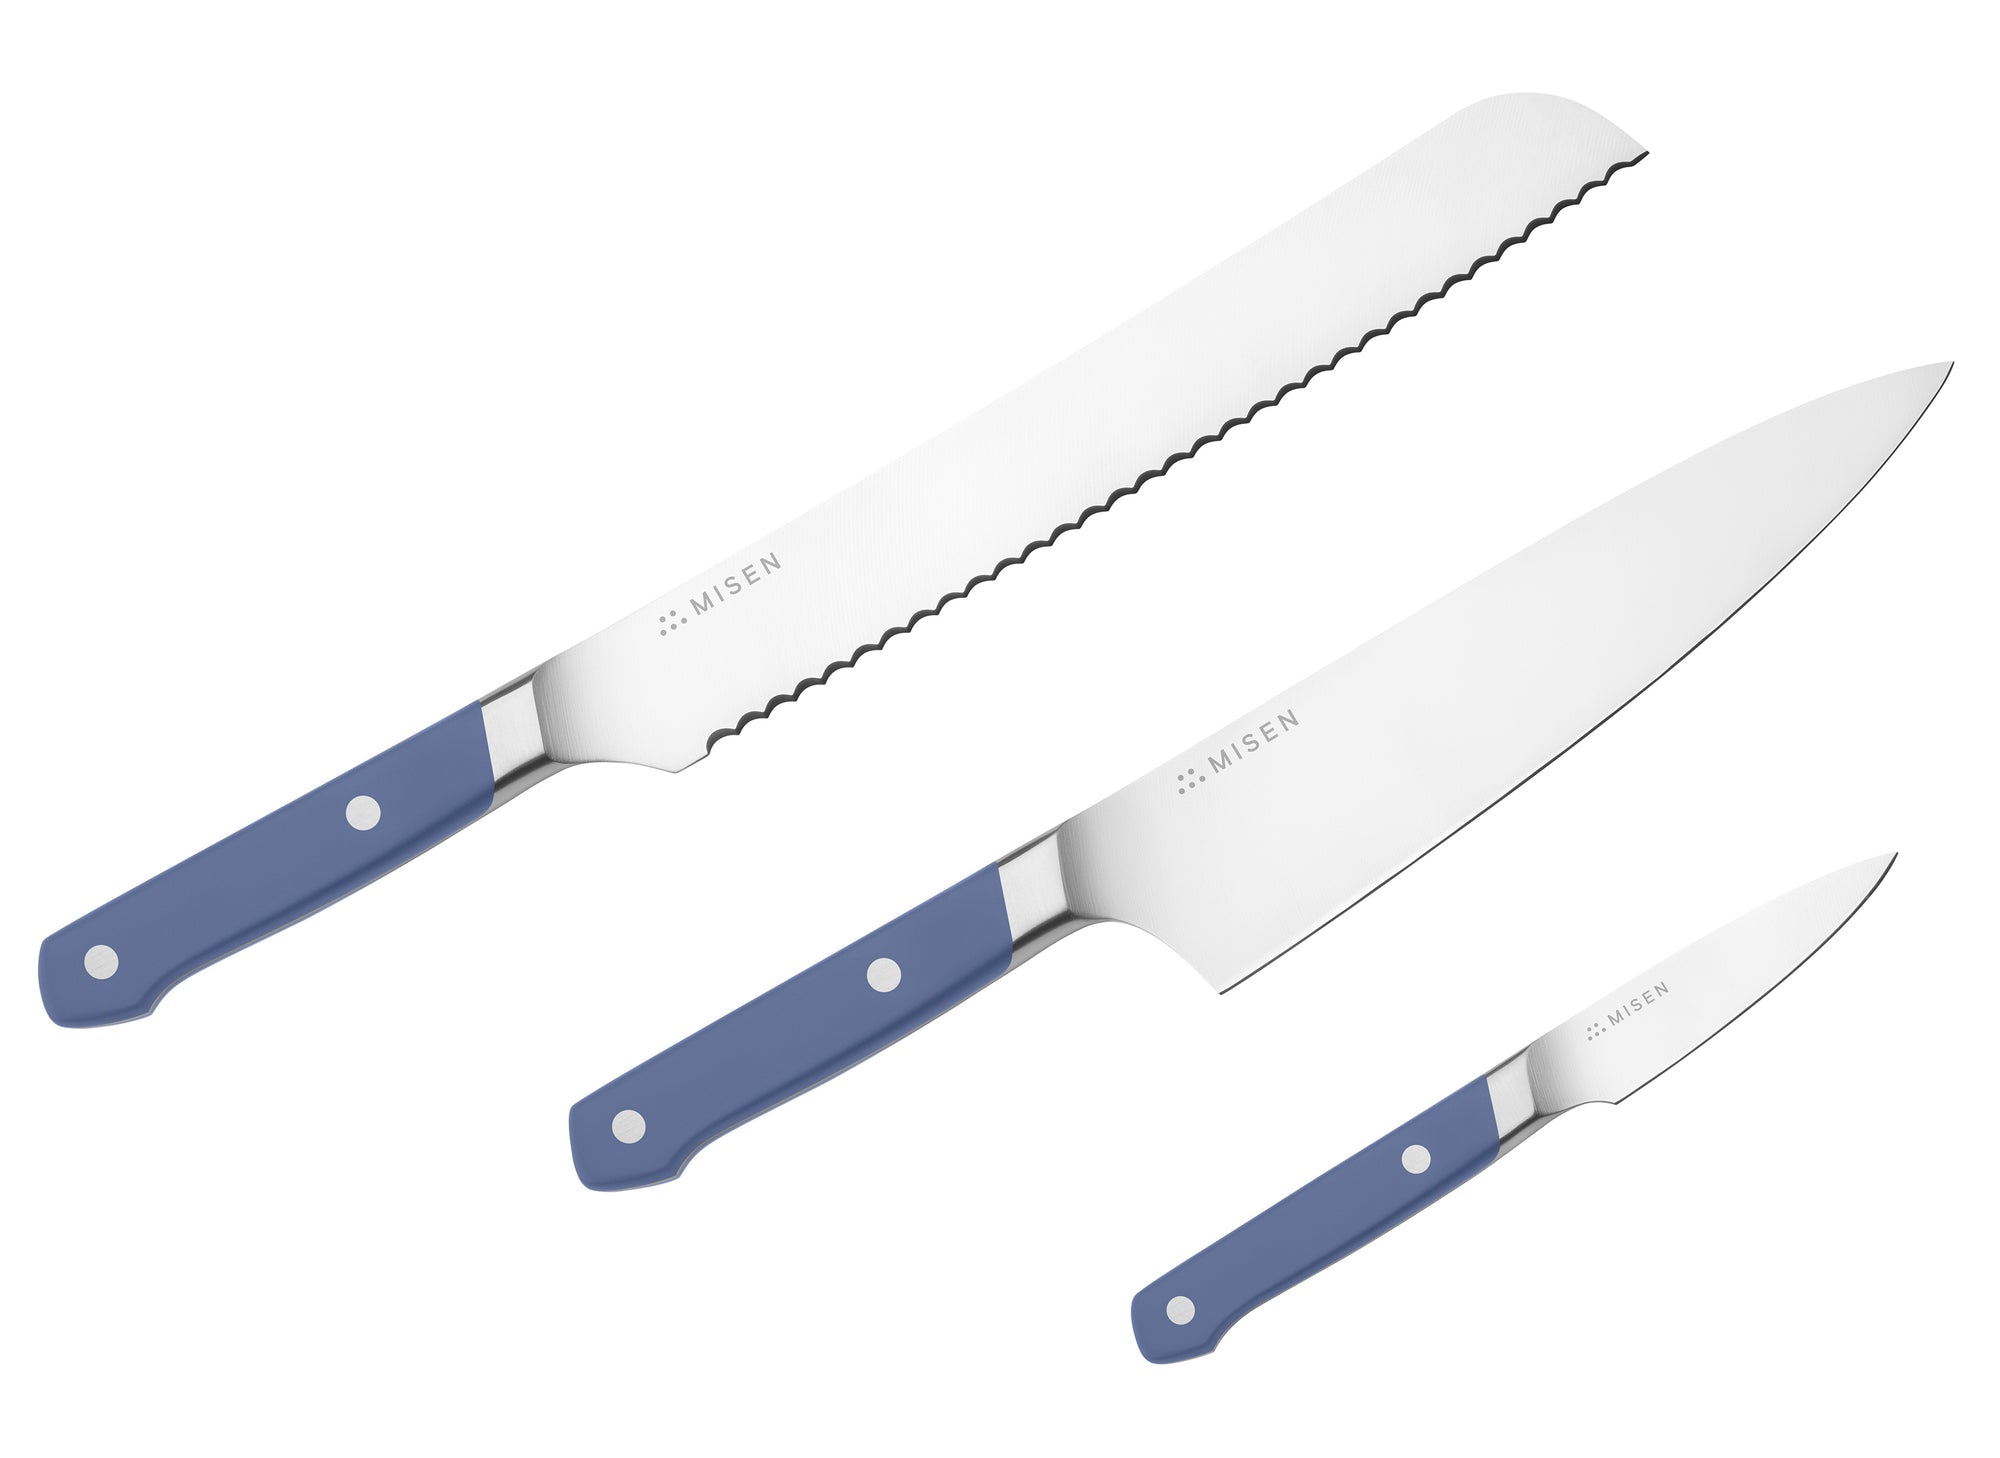 The Misen 3-Piece Essentials Knife Set in blue includes a Chef's Knife, a Serrated Knife and a Paring Knife.